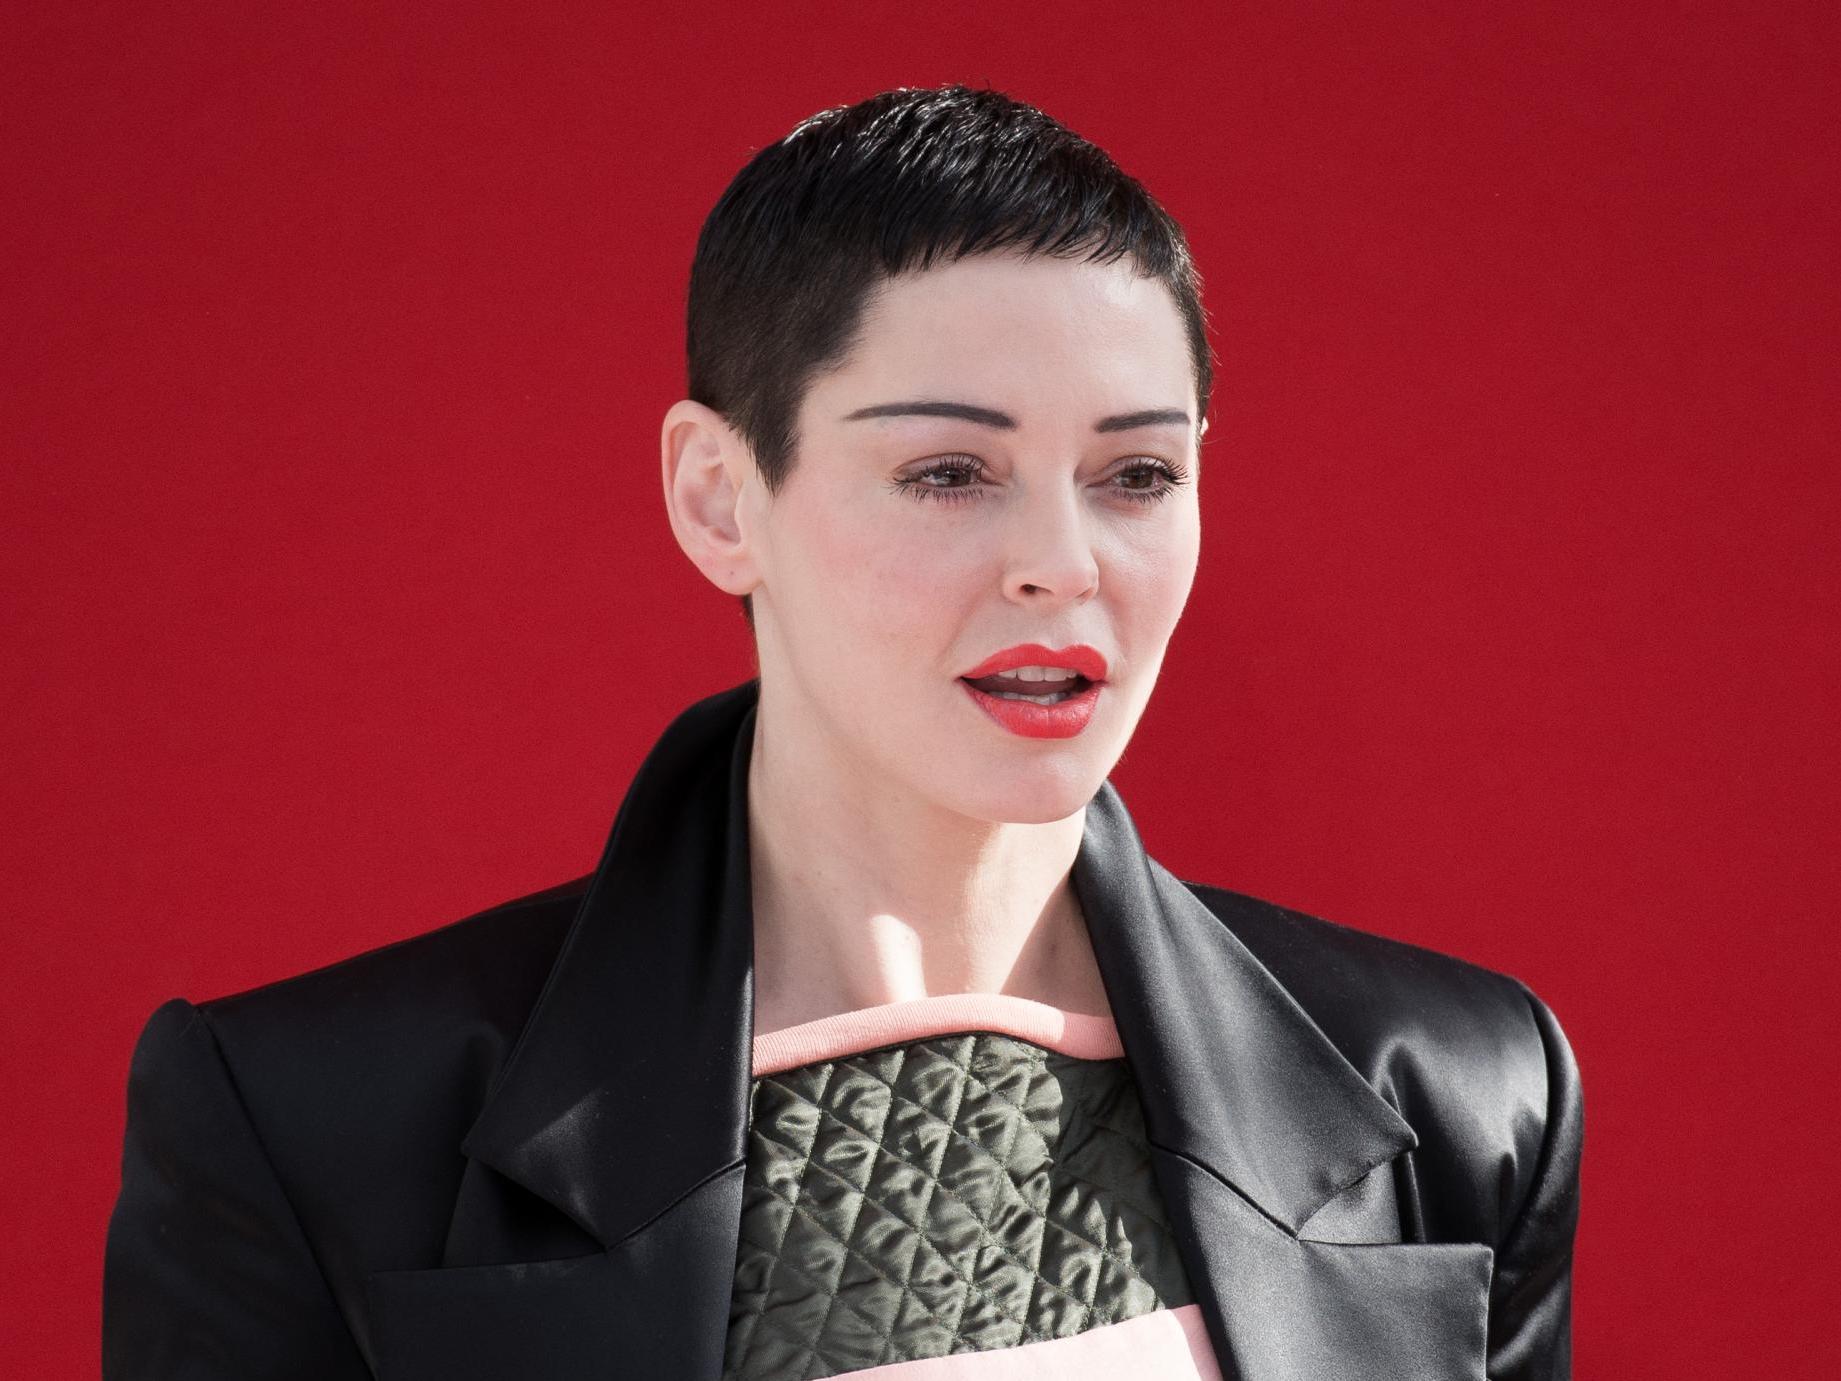 Rose Mcgowan Then And Now